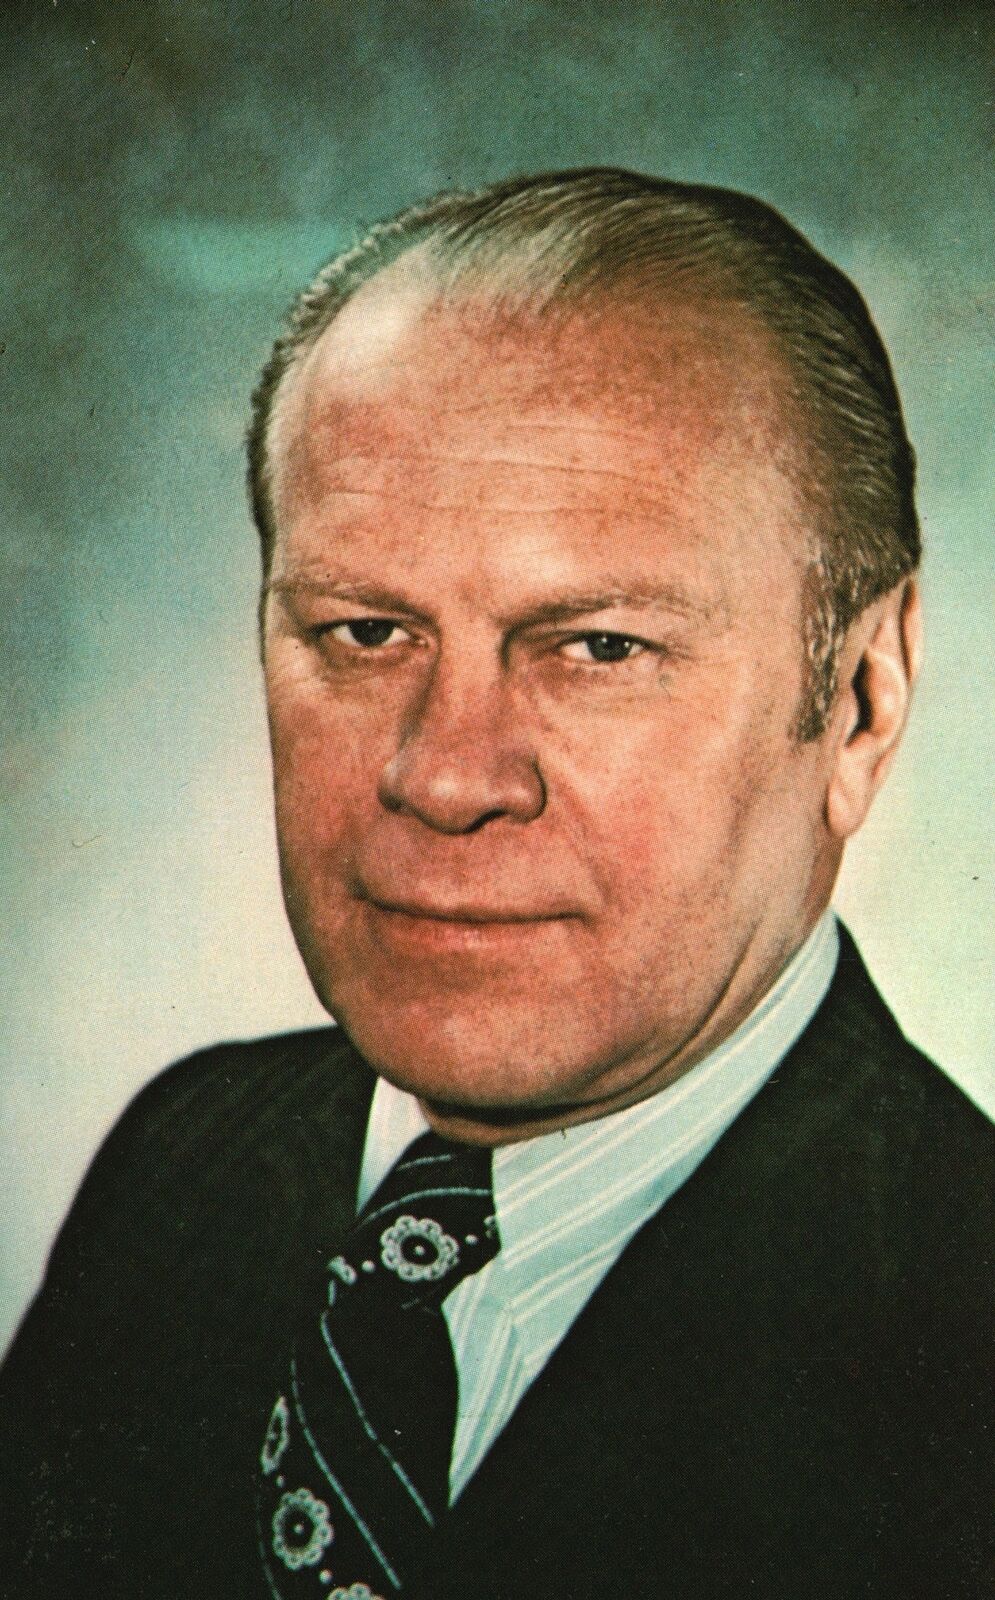 Portrait of Gerald R. Ford 38th President of the United States Vintage Postcard